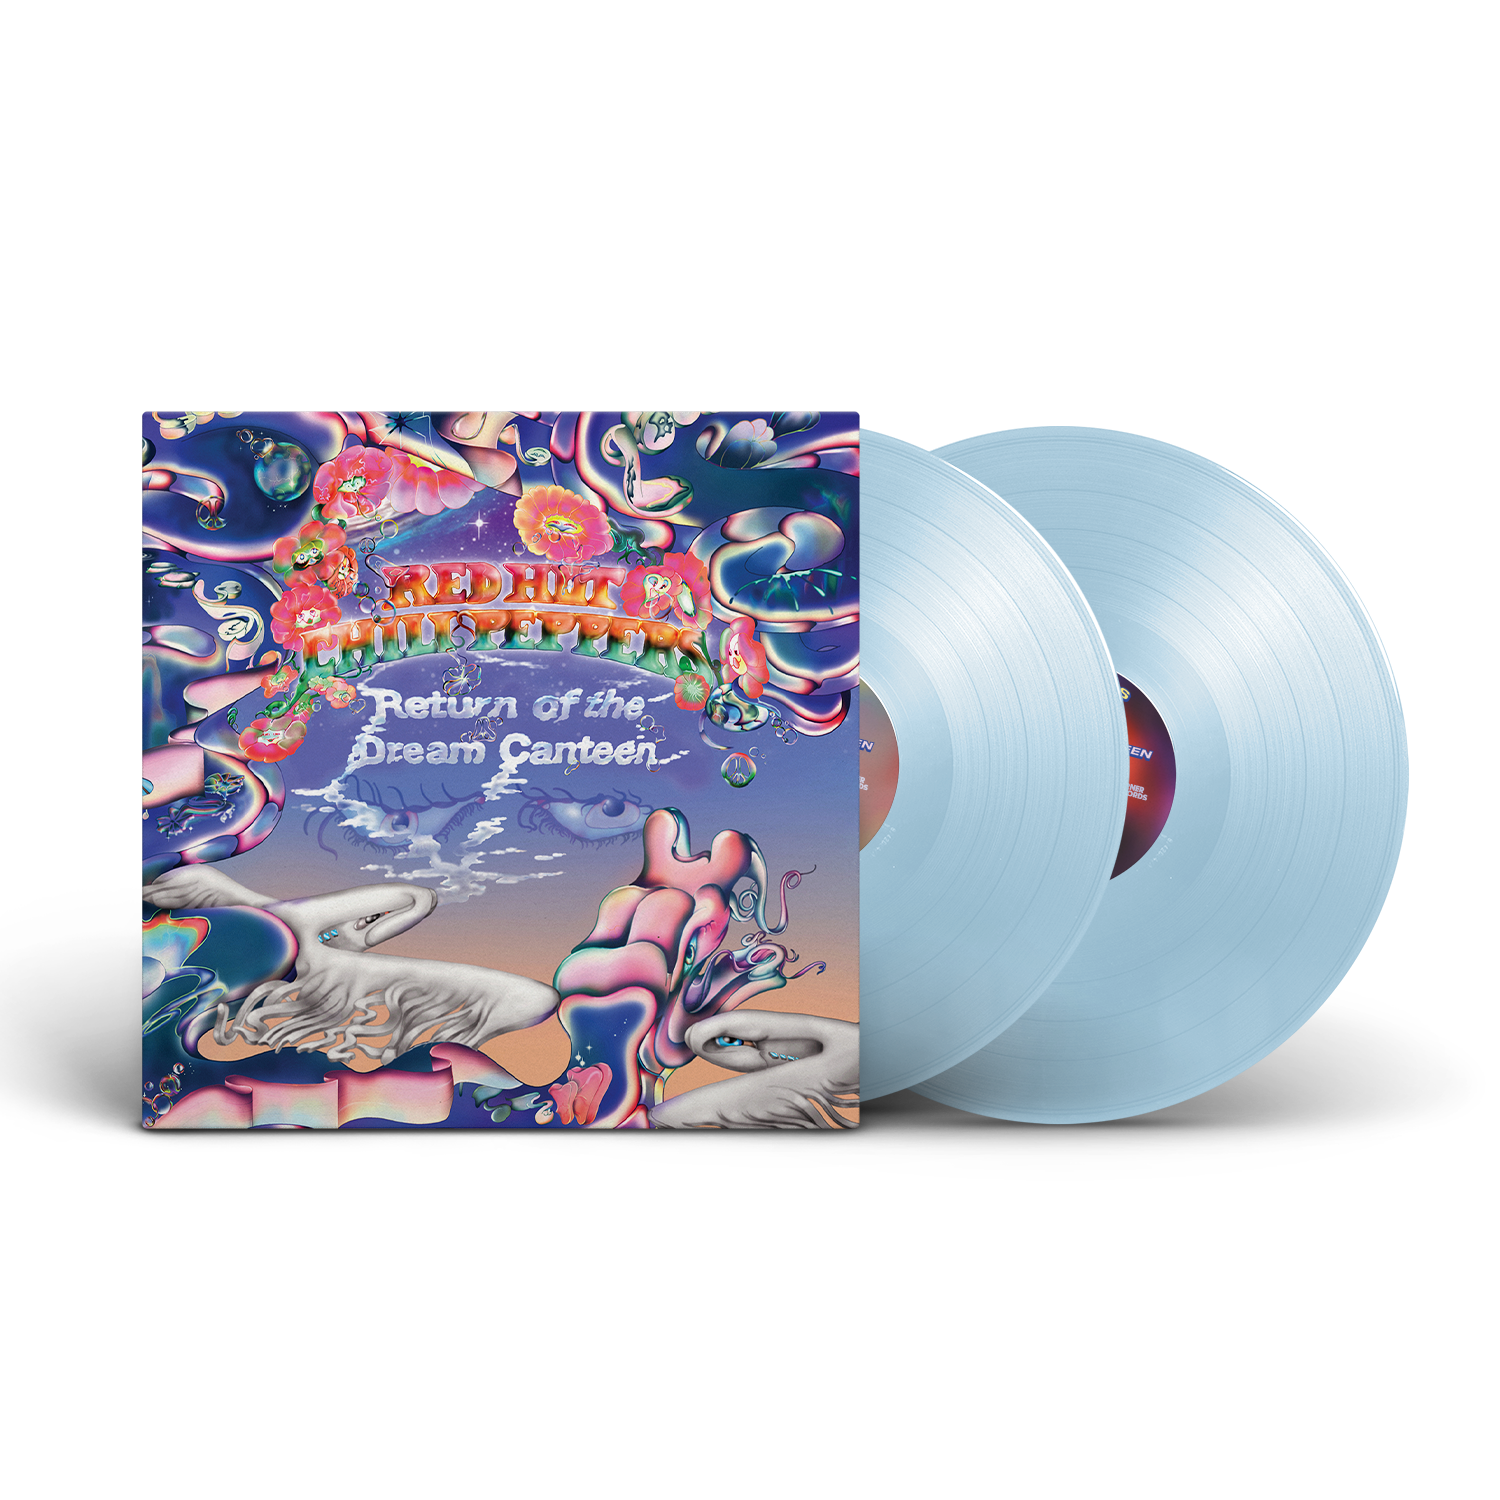 Return of the Dream Canteen - LIMITED BABY BLUE 2LP – Red Hot Chili Peppers